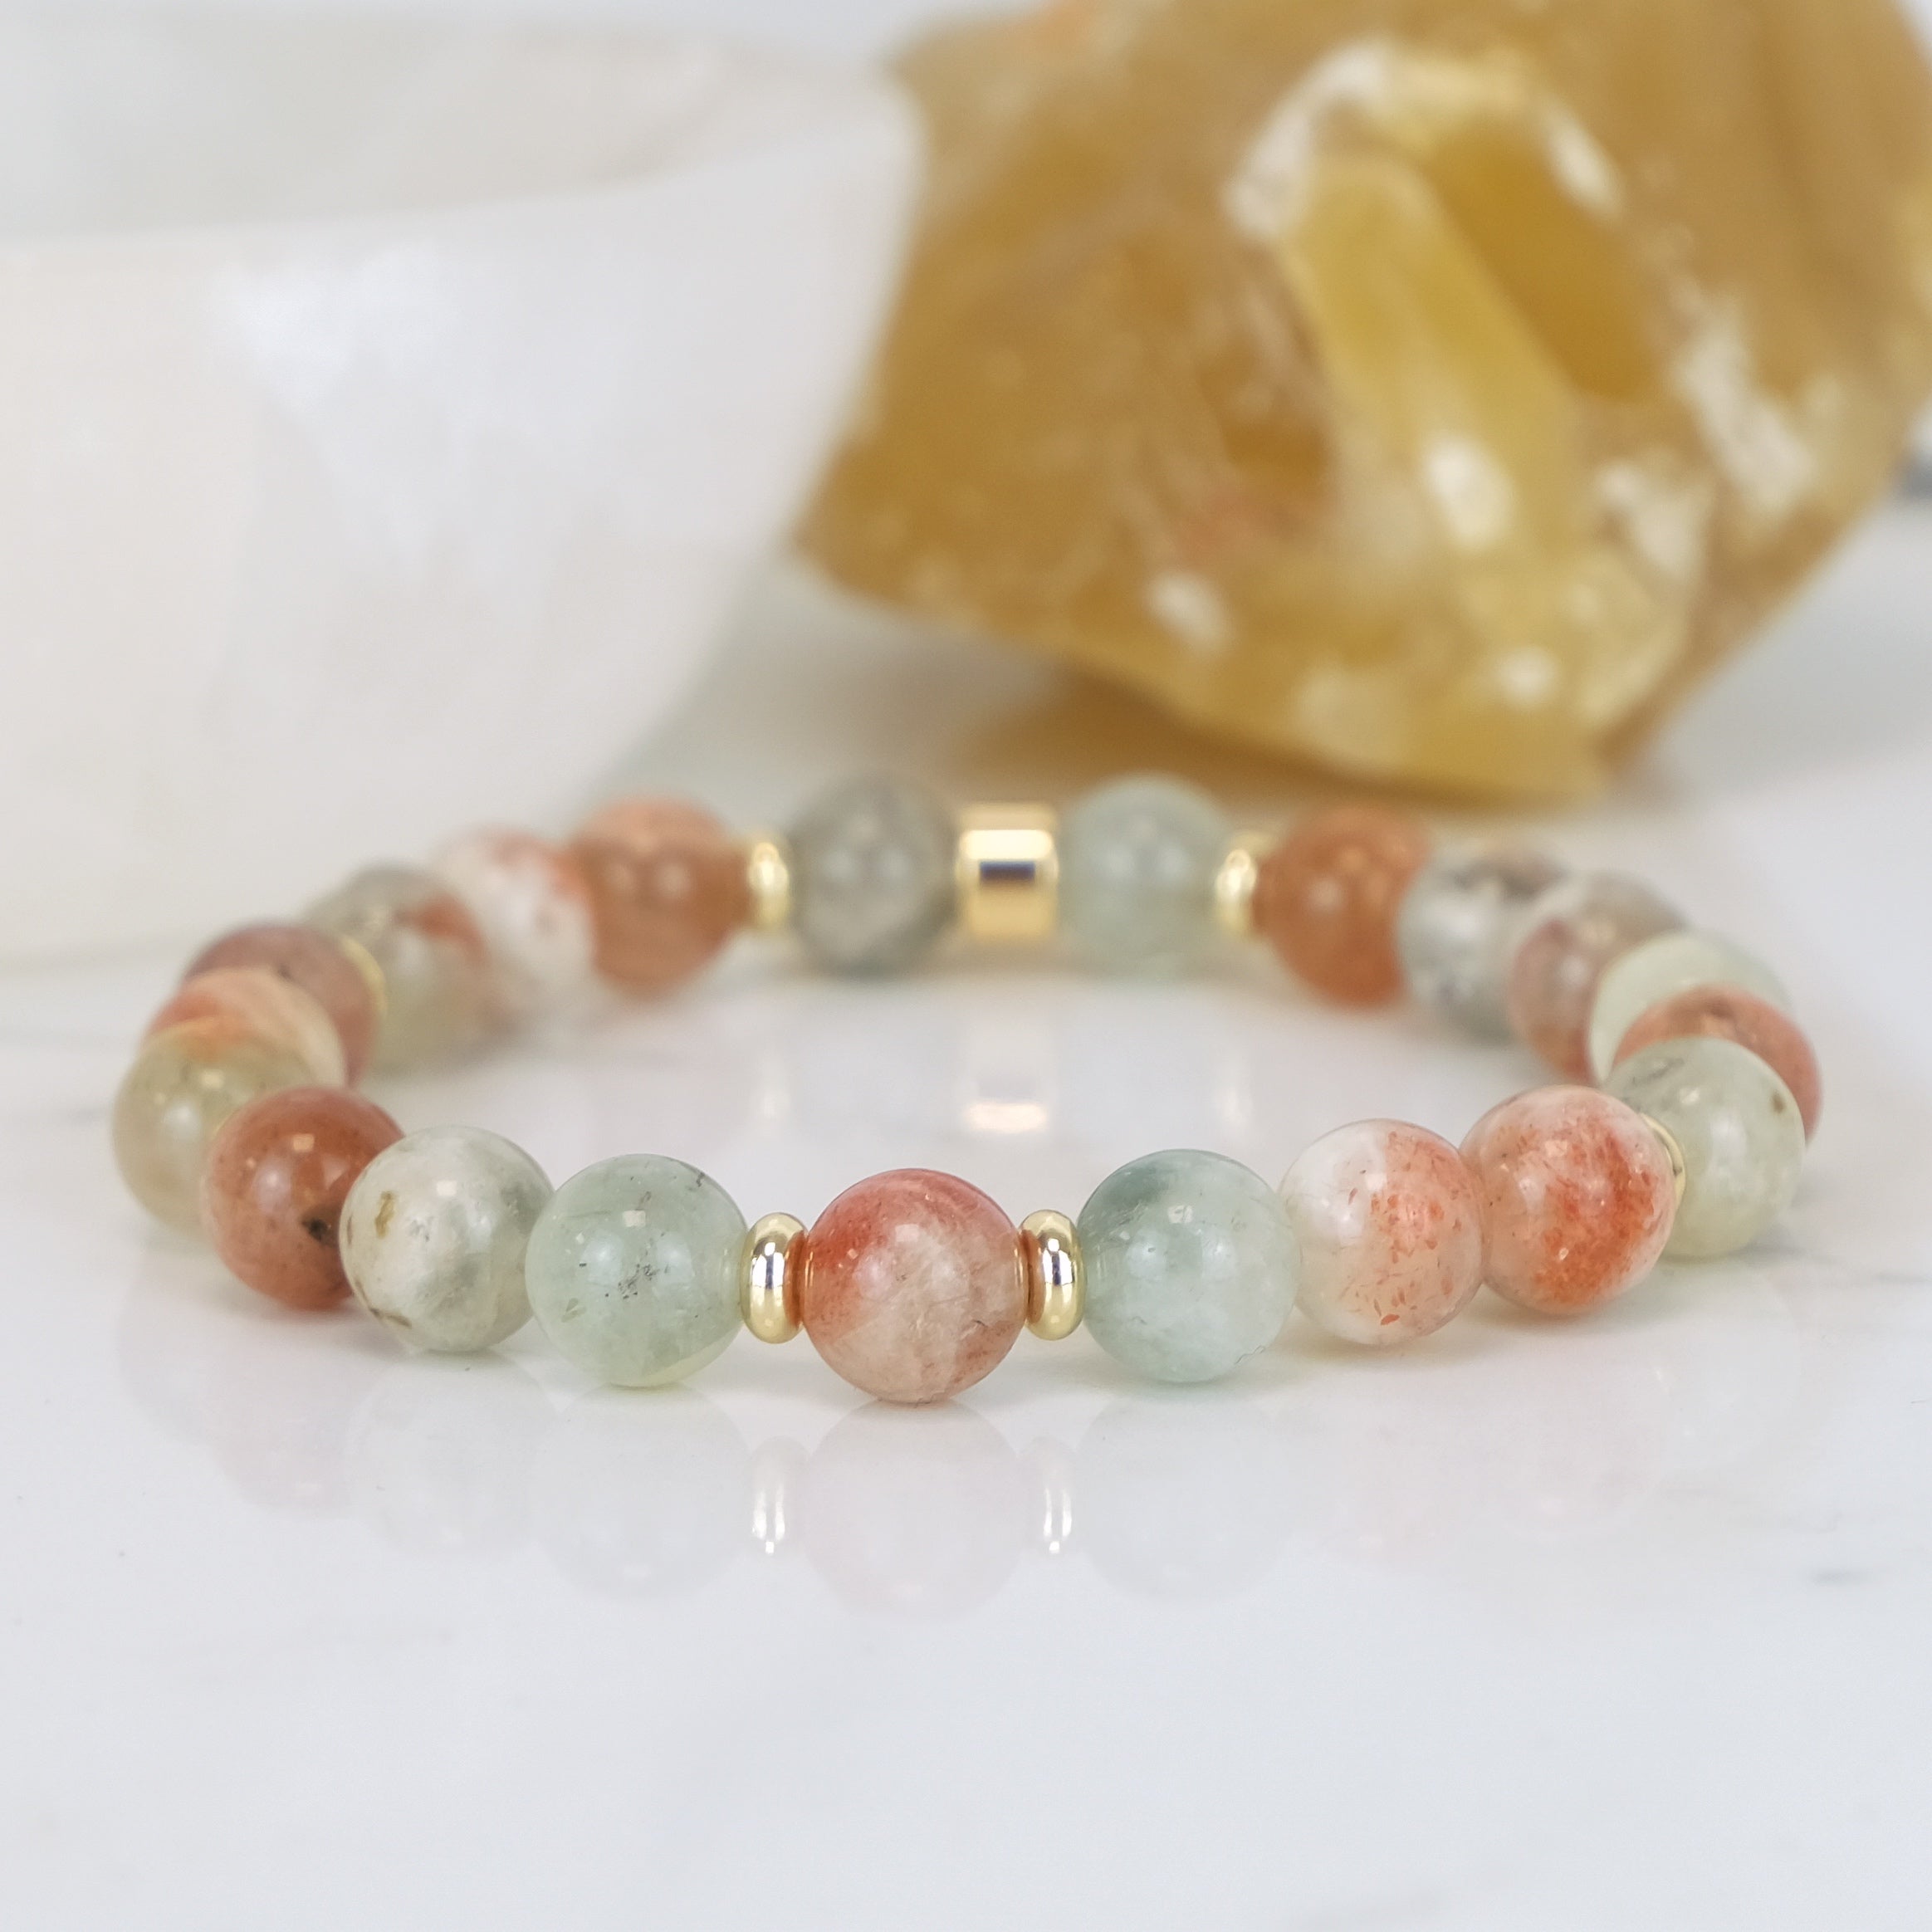 Arusha sunstone gemstone bracelet in 8mm with 18ct gold plated accessories